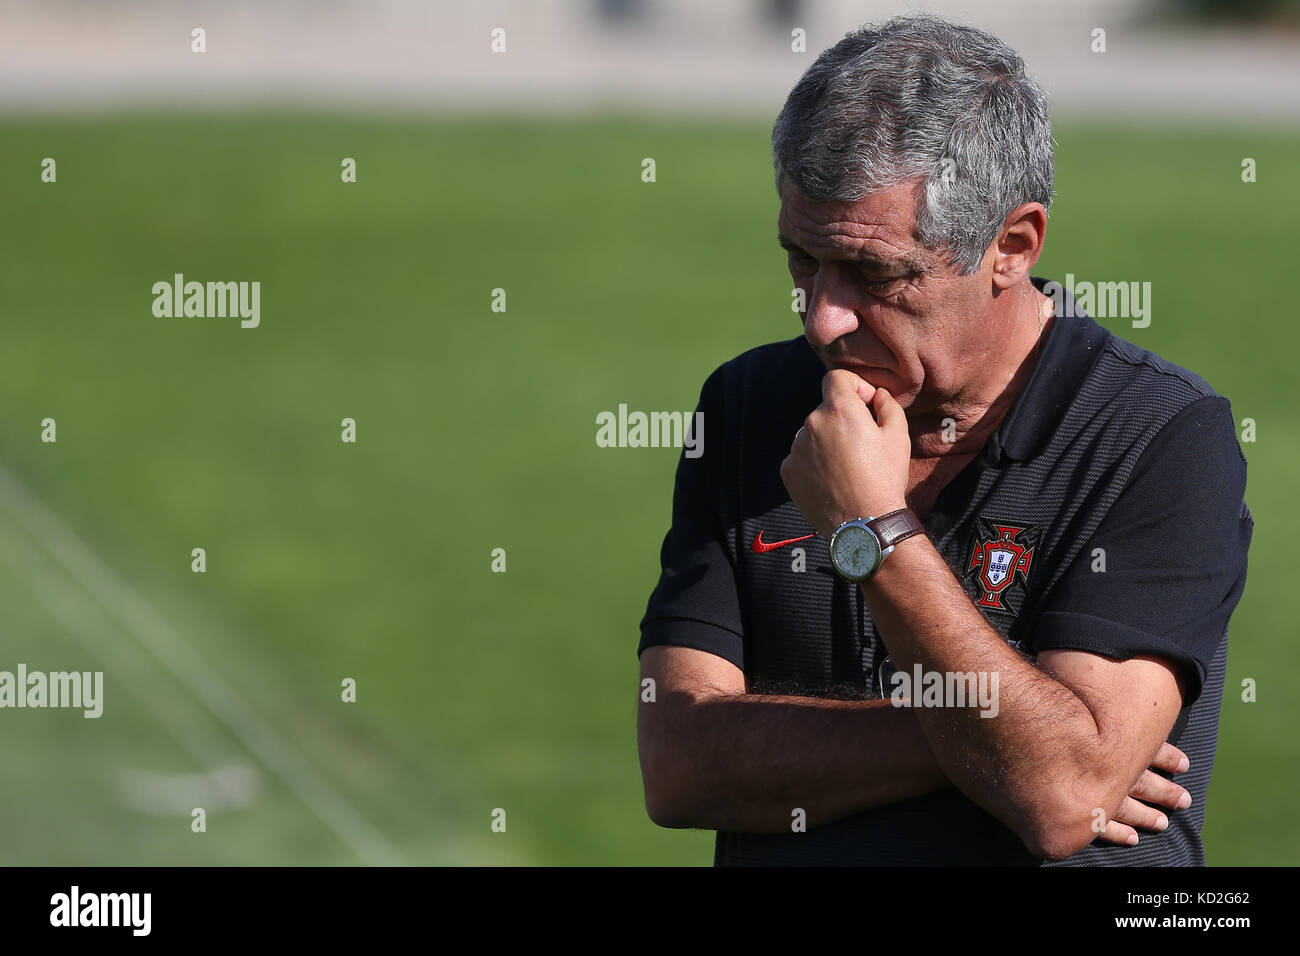 Oeiras, Portugal. 9th Oct 2017. Portugal's head coach Fernando Santos in action during National Team Training session before the match between Portugal and Switzerland at City Football in Oeiras on October 9, 2017. Credit: Bruno Barros/Alamy Live News Stock Photo